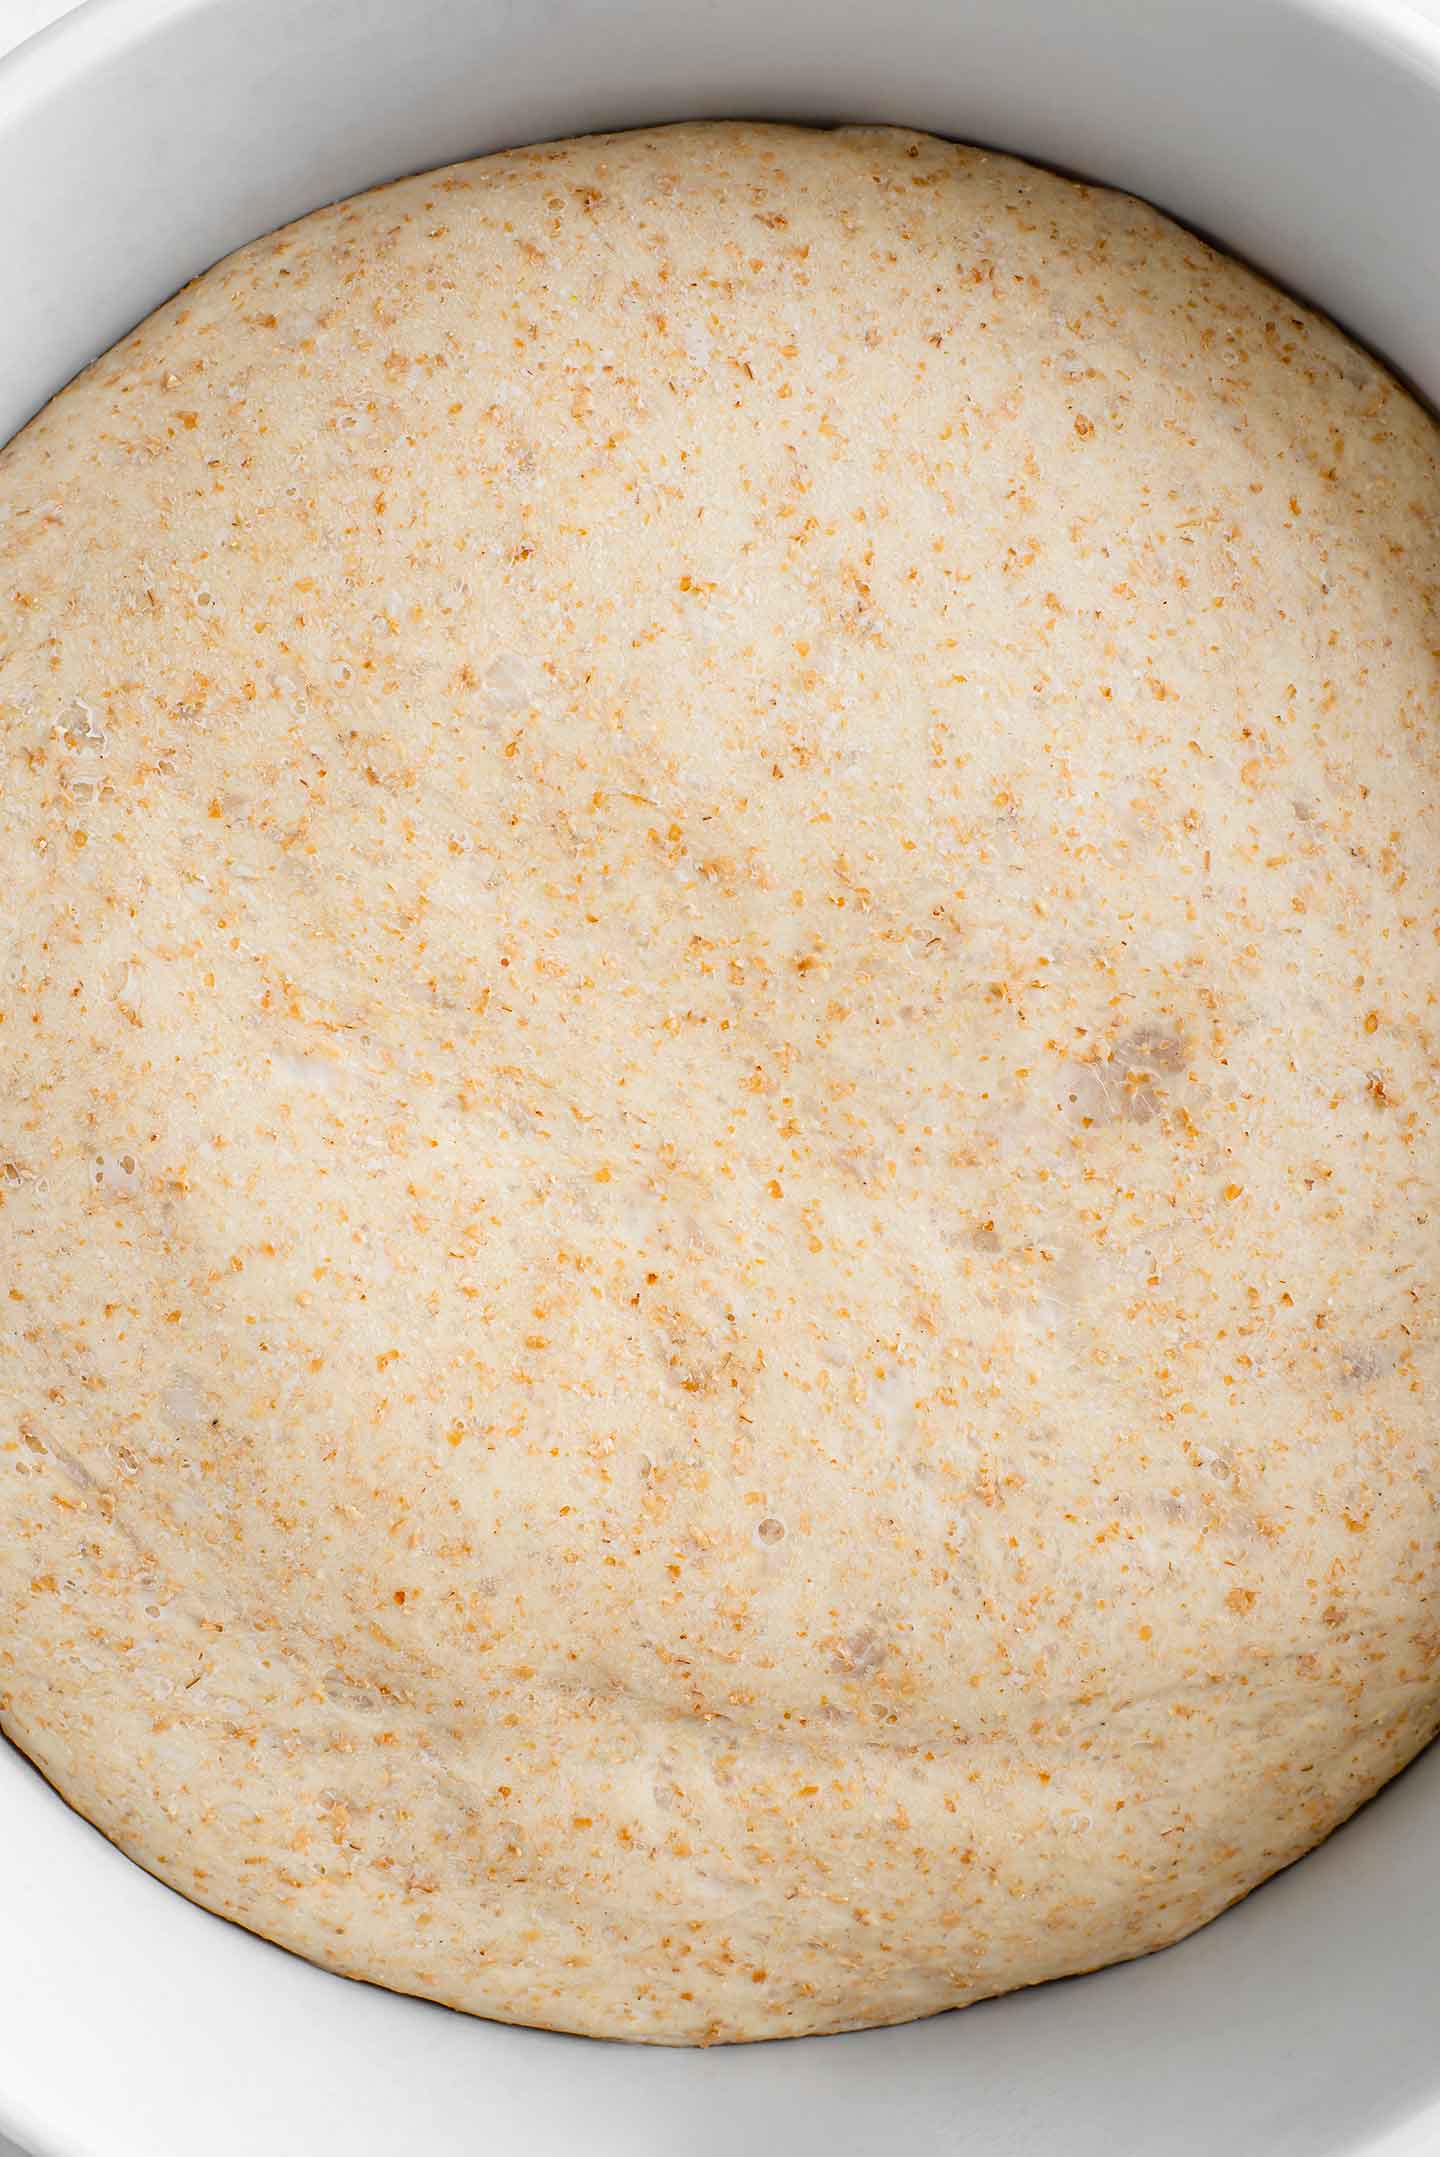 Top down view of risen dough filling a bowl. The easy pizza dough has expanded to fill nearly the entire bowl.